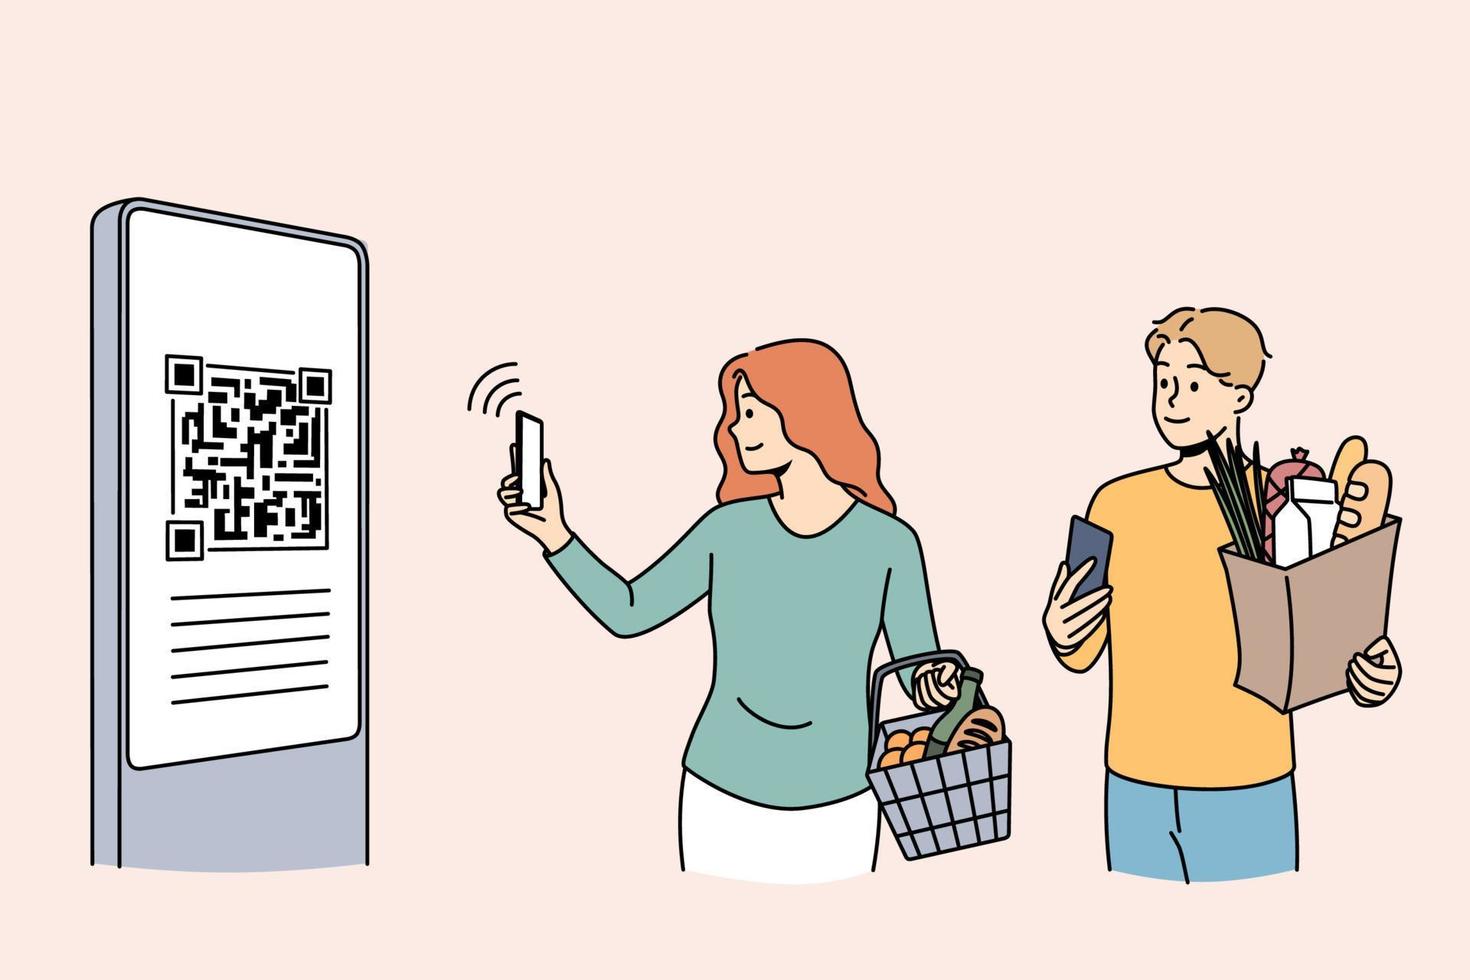 Online payment and qr code concept. Young couple standing holding bags with food paying online with smartphone on qr code vector illustration